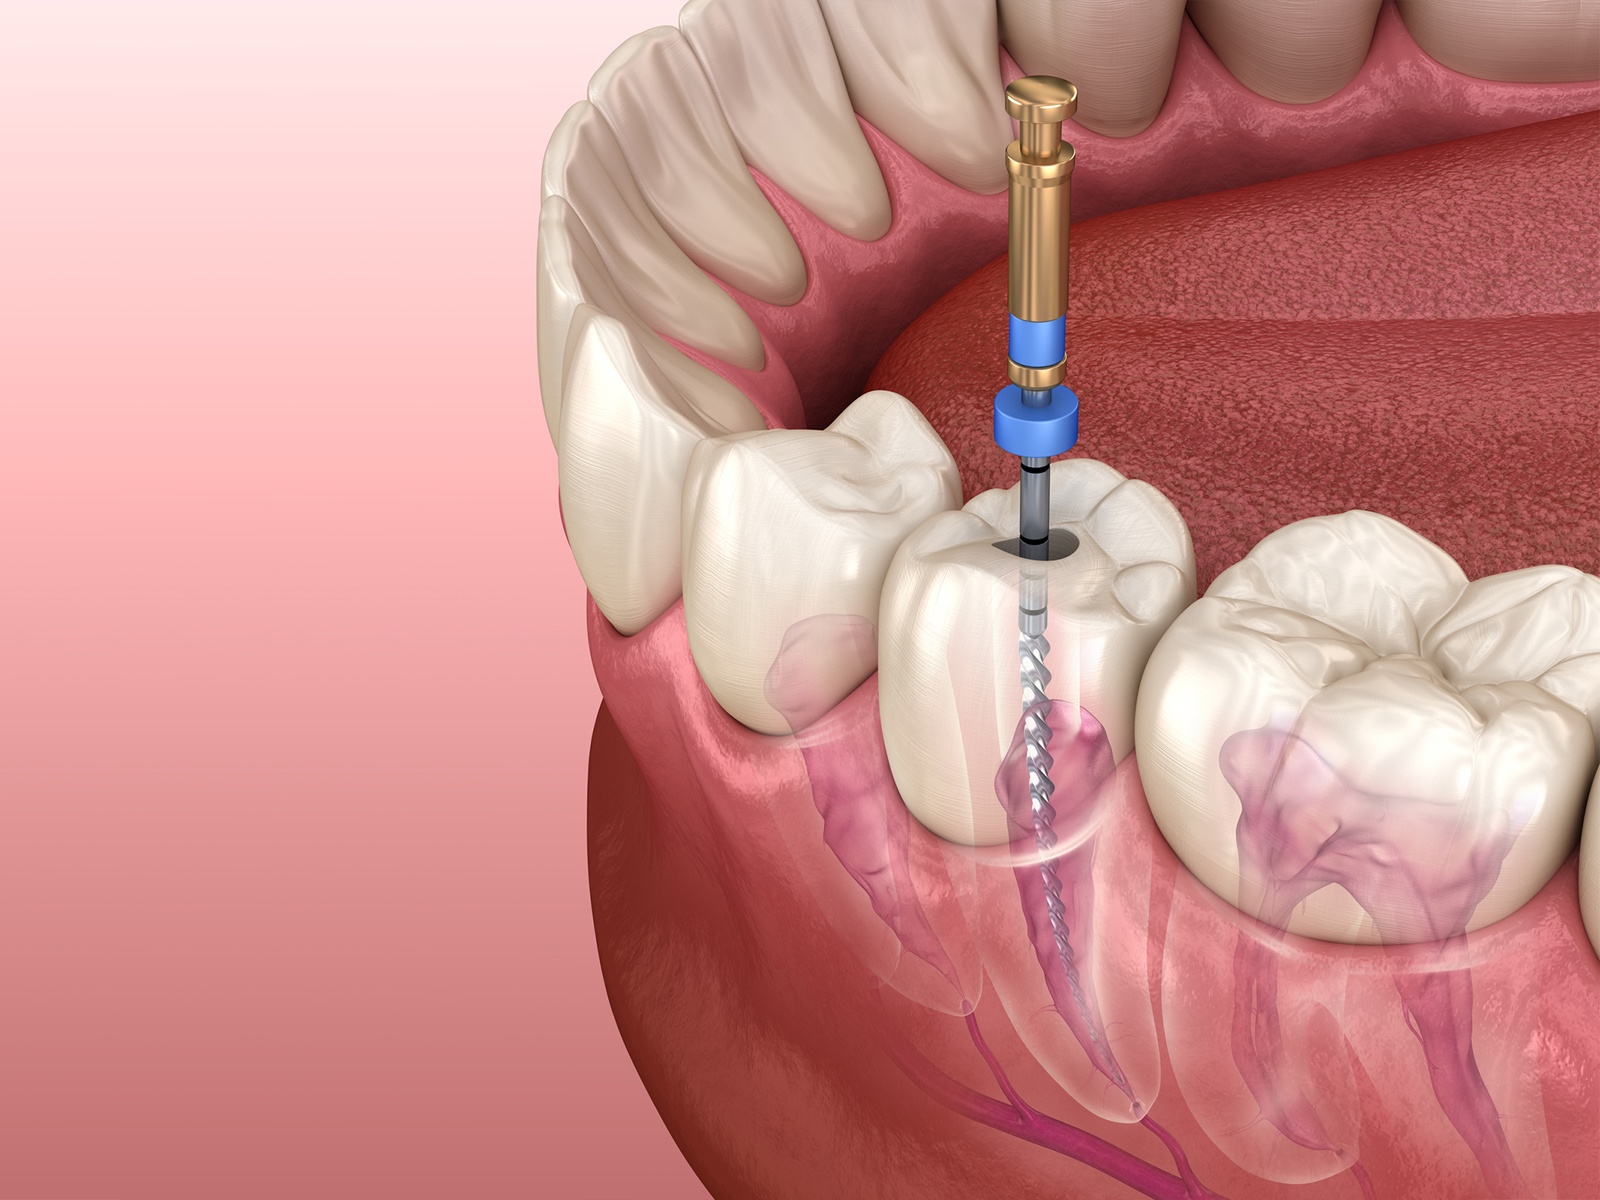 Can Nerves Grow Back After Root Canal?